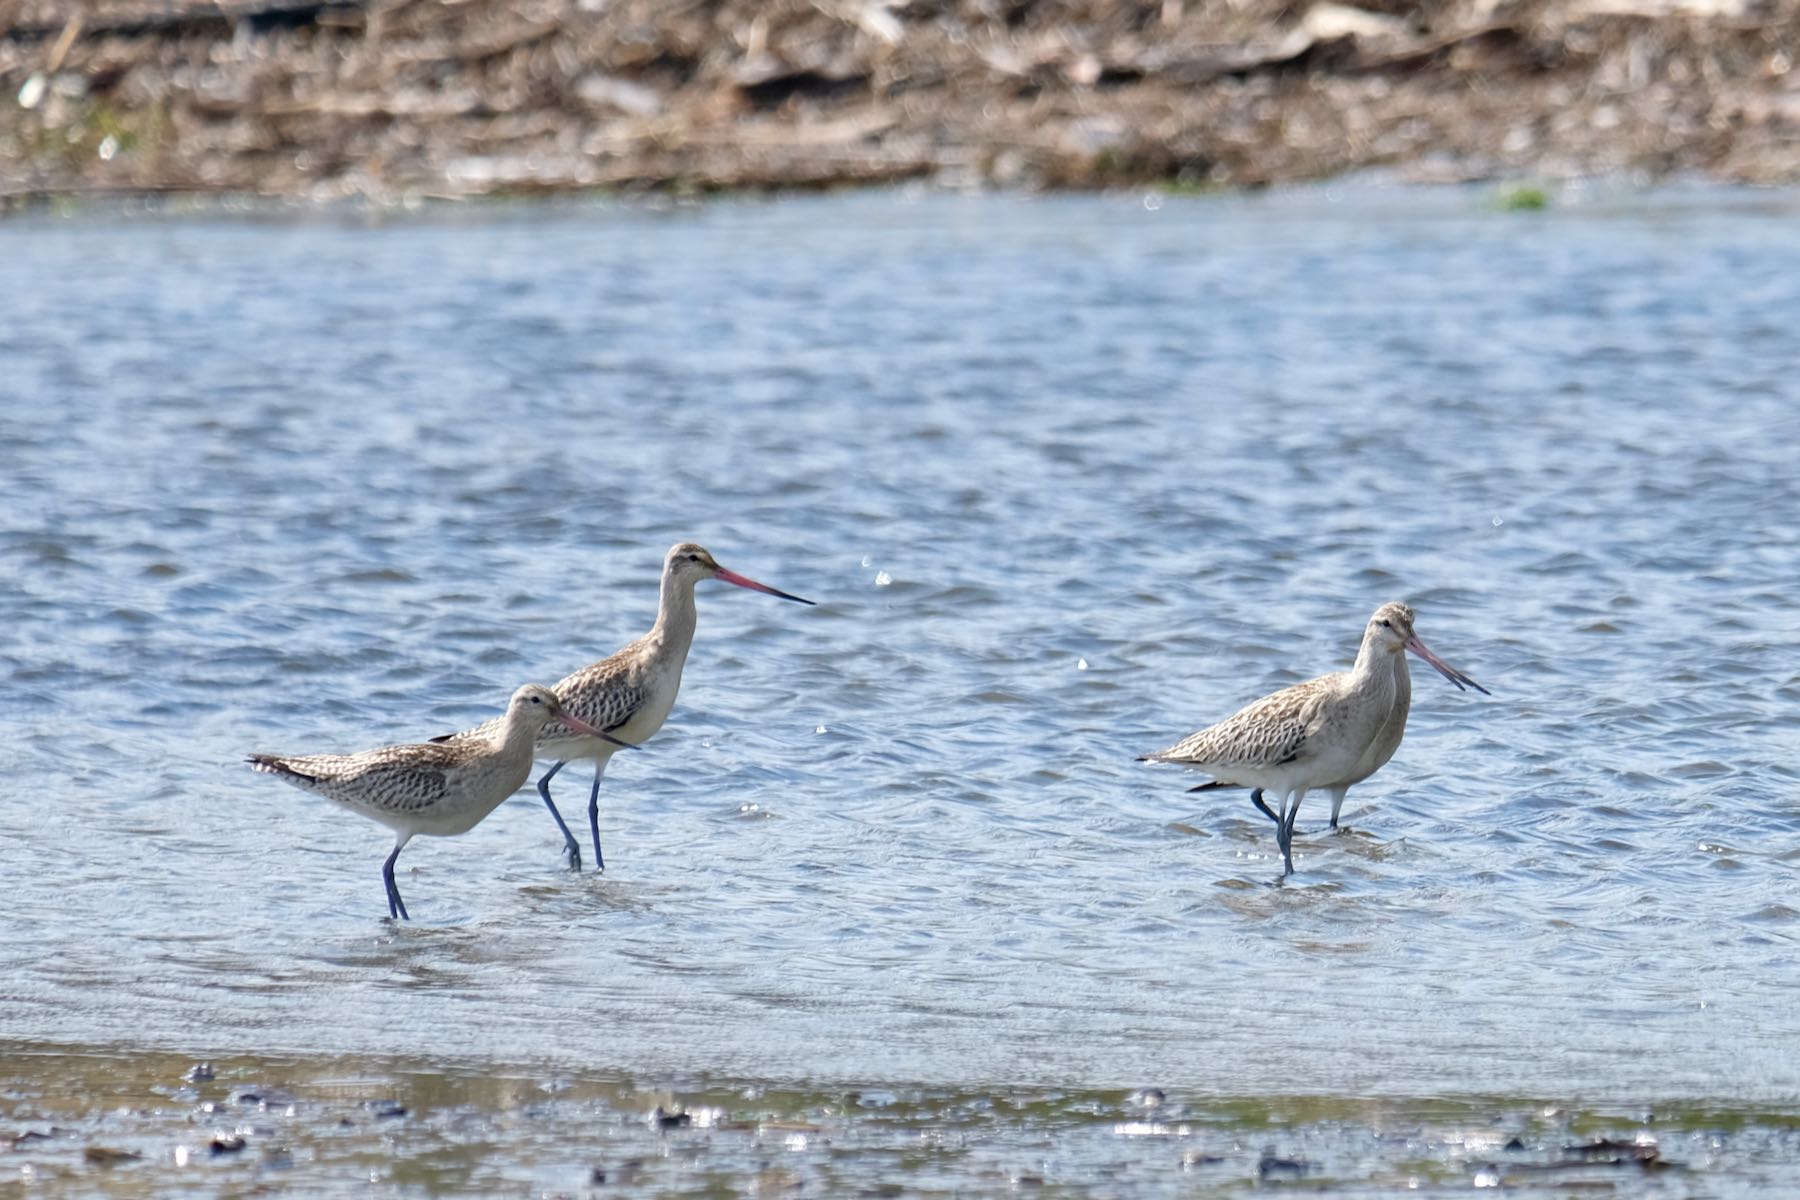 Four large long-legged waders, brown above, pale below, with a long tapering and slightly upturned pink bill with black tip.